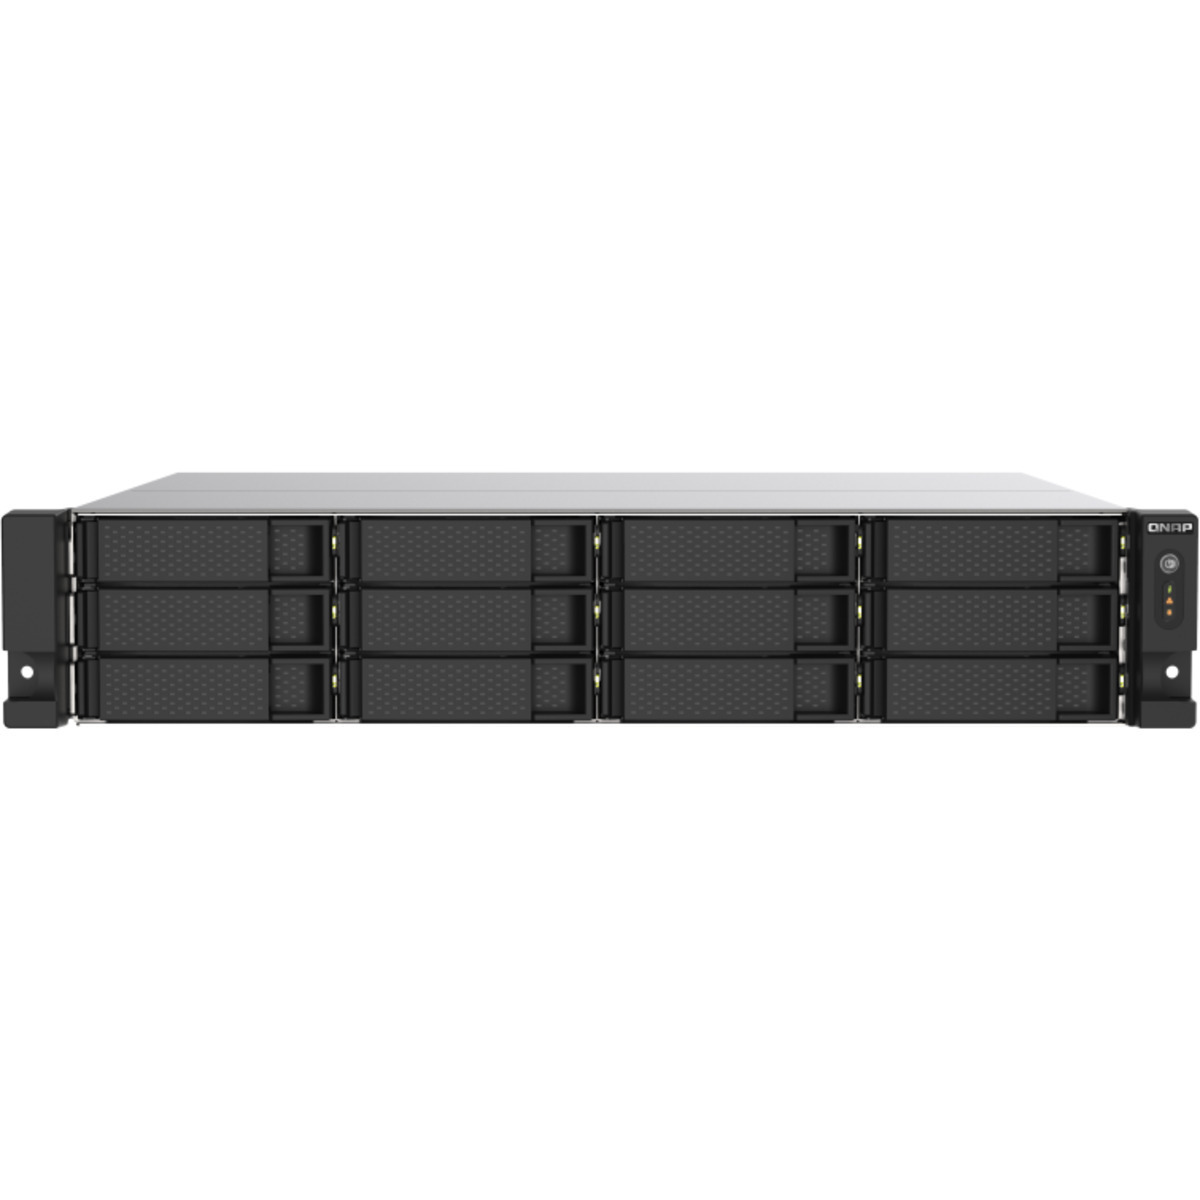 QNAP TS-1273AU-RP 108tb 12-Bay RackMount Multimedia / Power User / Business NAS - Network Attached Storage Device 9x12tb Western Digital Ultrastar DC HC520 HUH721212ALE600 3.5 7200rpm SATA 6Gb/s HDD ENTERPRISE Class Drives Installed - Burn-In Tested - FREE RAM UPGRADE TS-1273AU-RP